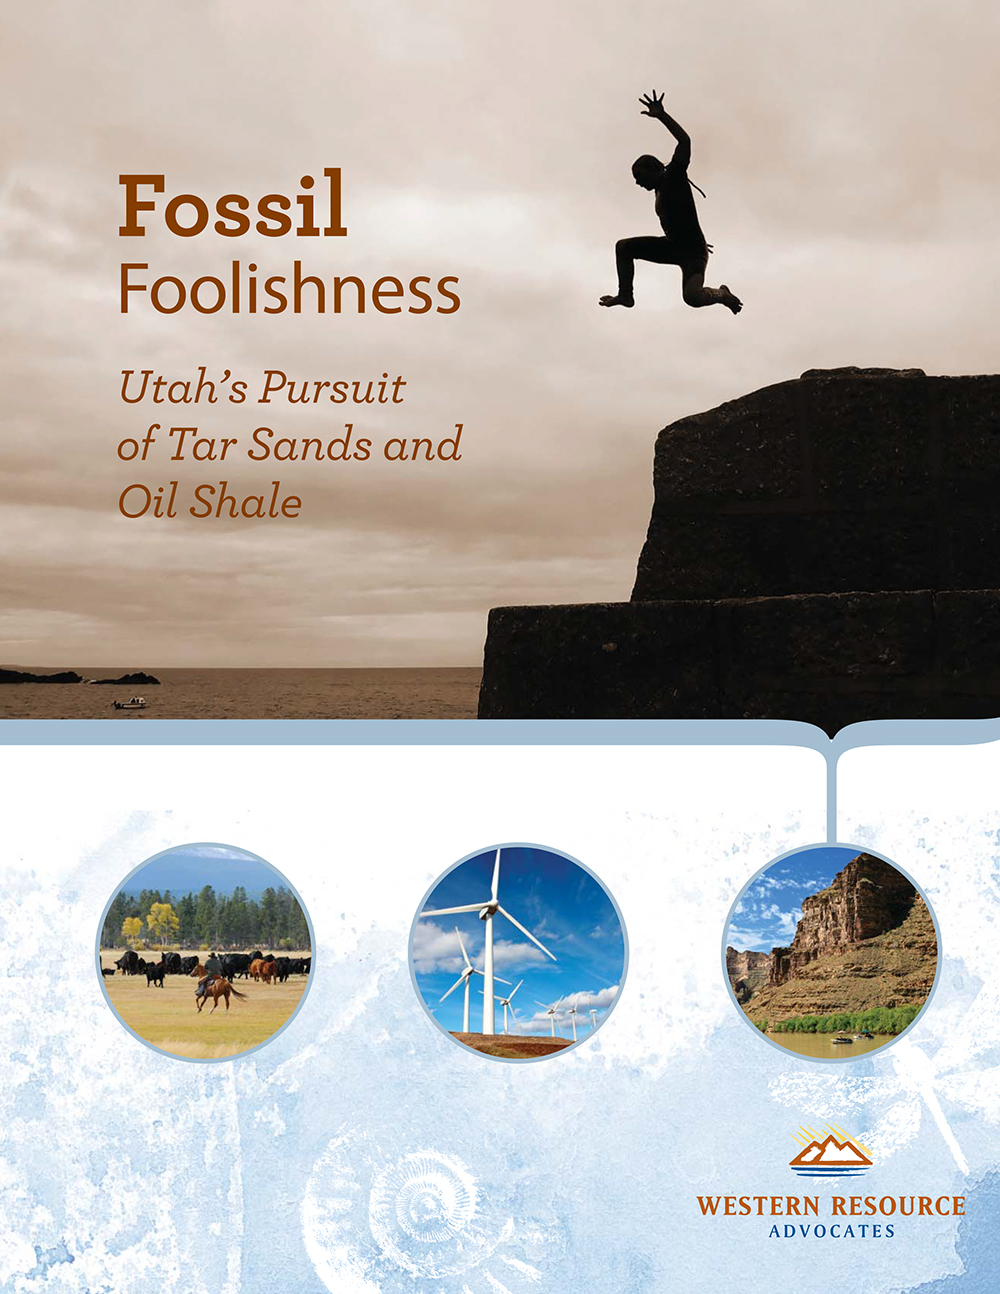 Fossil Foolishness: Utah's Pursuit of Tar Sands and Oil Shale